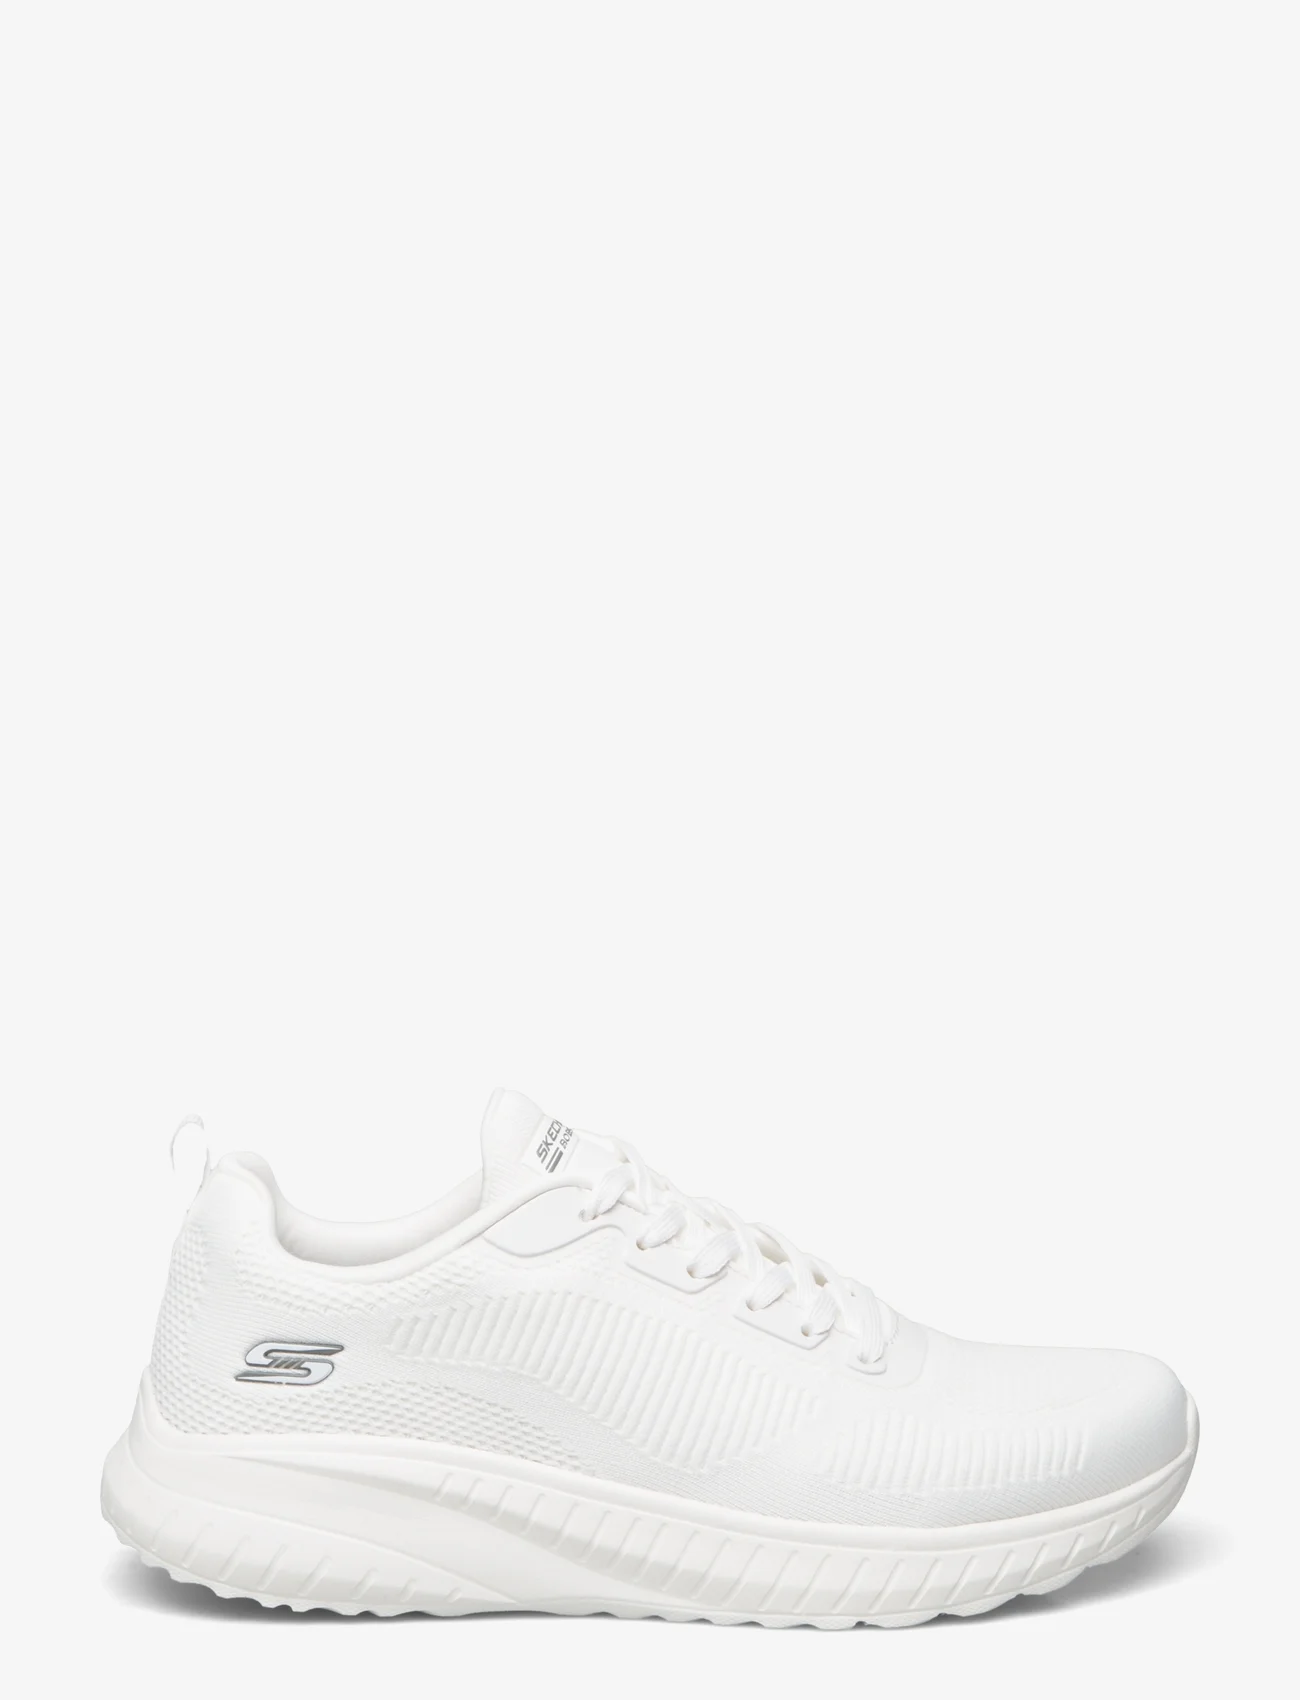 Skechers - Mens BOBS Squad Chaos - low tops - ofwt off white - 1